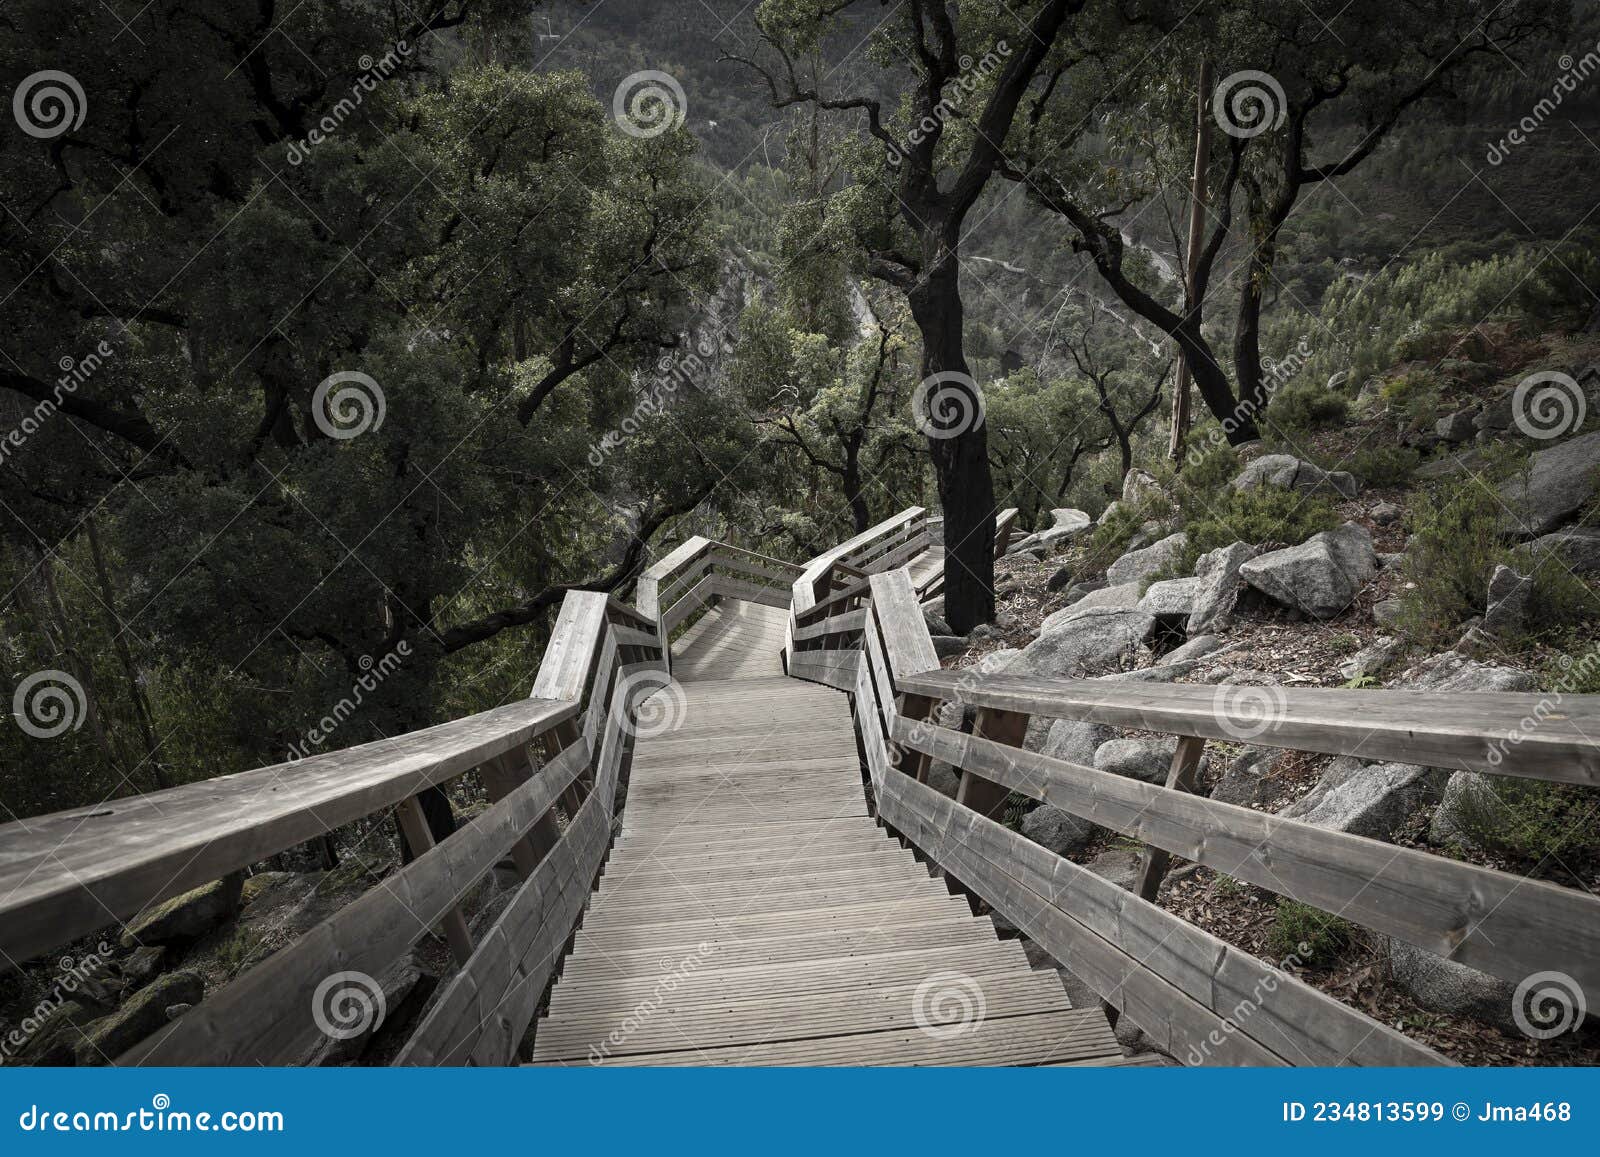 wooden walkways of paiva river at arouca geopark